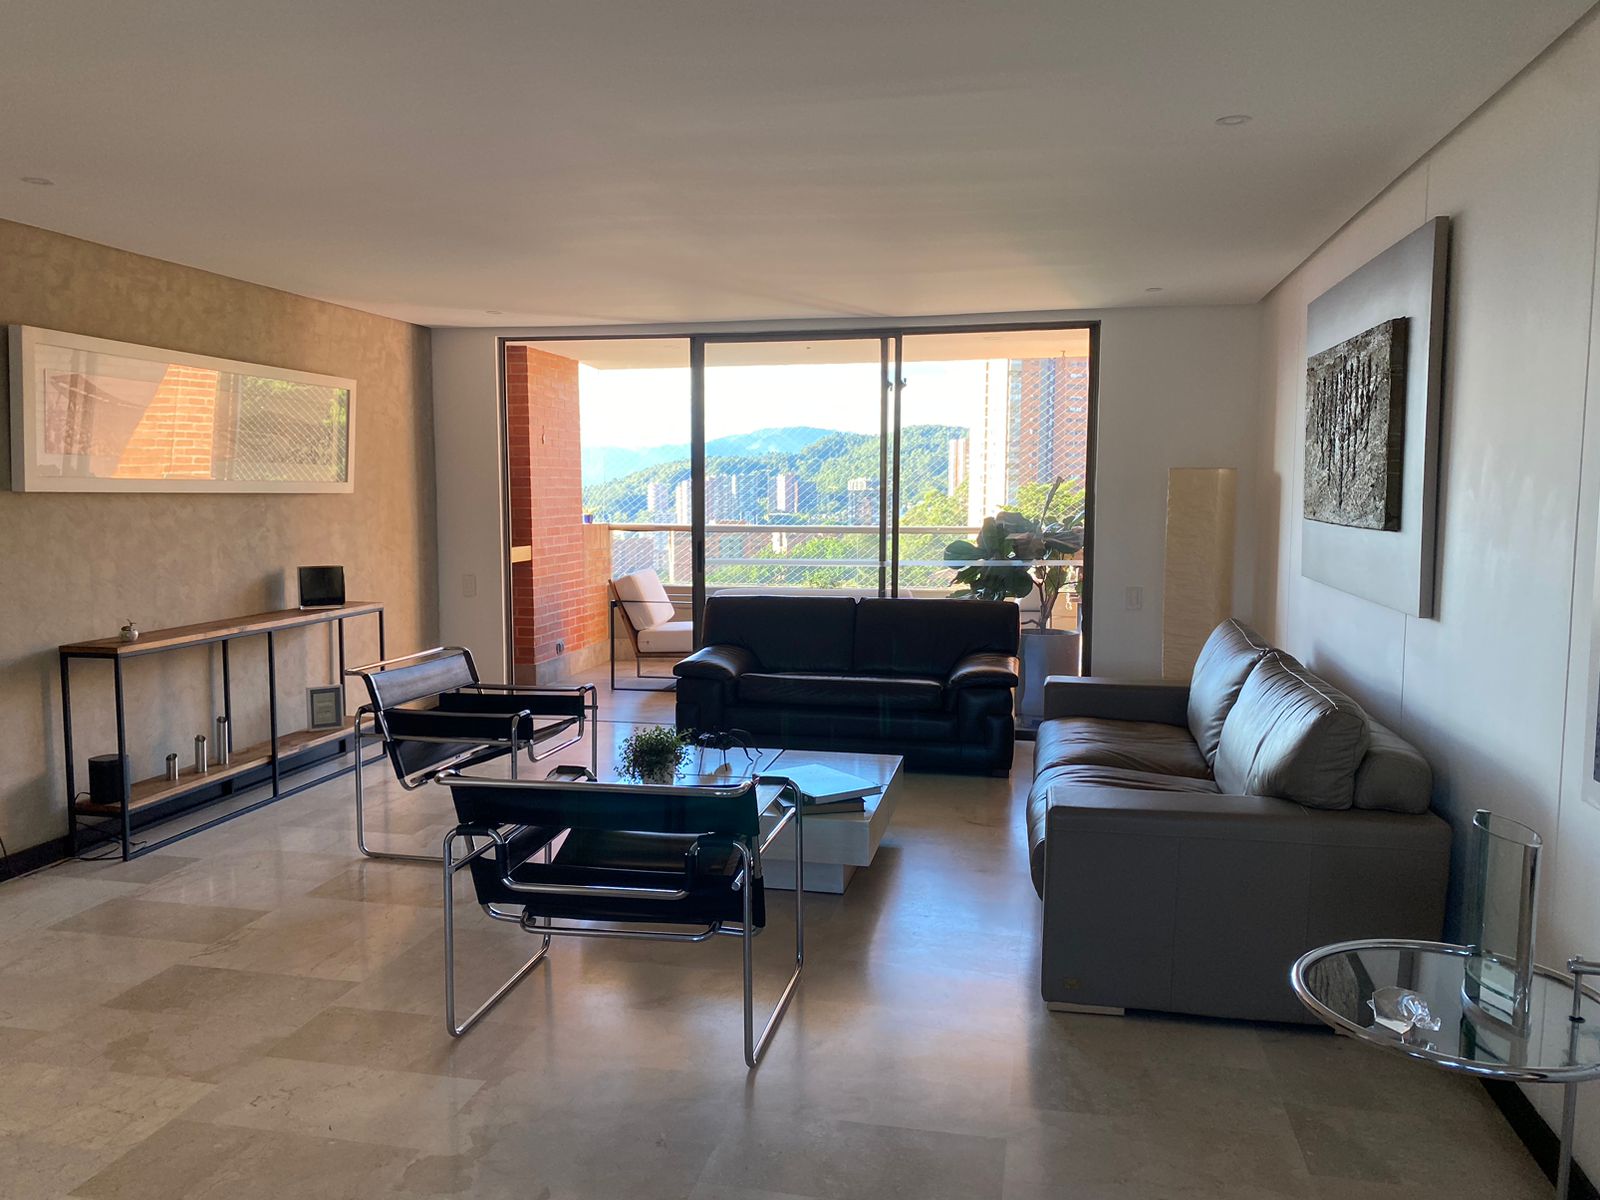 El Poblado 12th Floor Apartment With Panoramic Views, Open Concept Kitchen & Complete Amenity Package